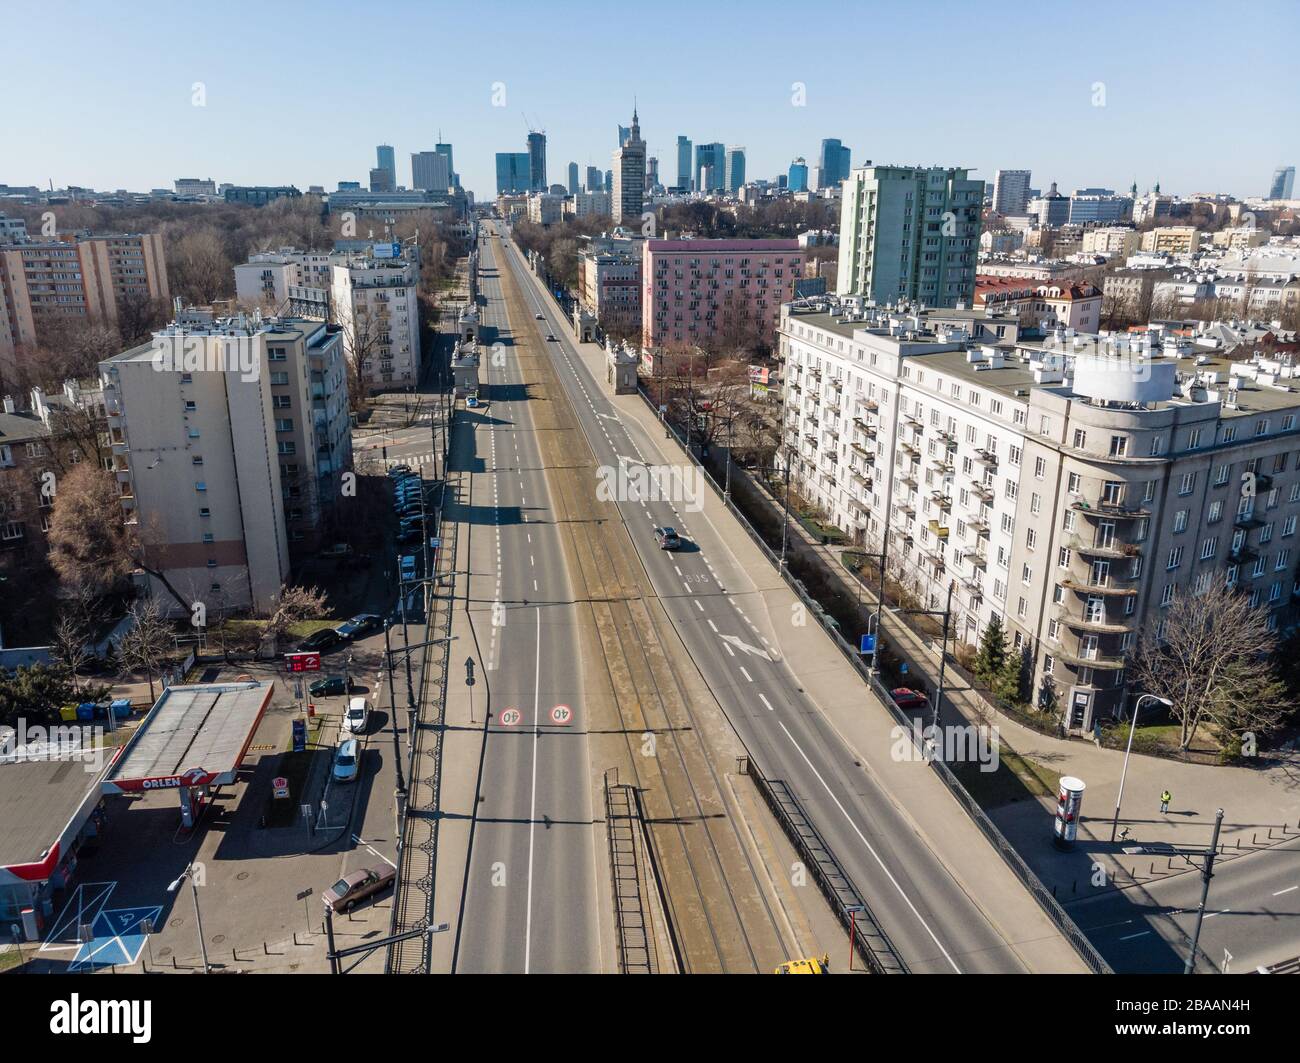 Warsaw, Poland - march 15 2020: empty streets of Warsaw, capial of Poland during coronavirus pandemic Stock Photo